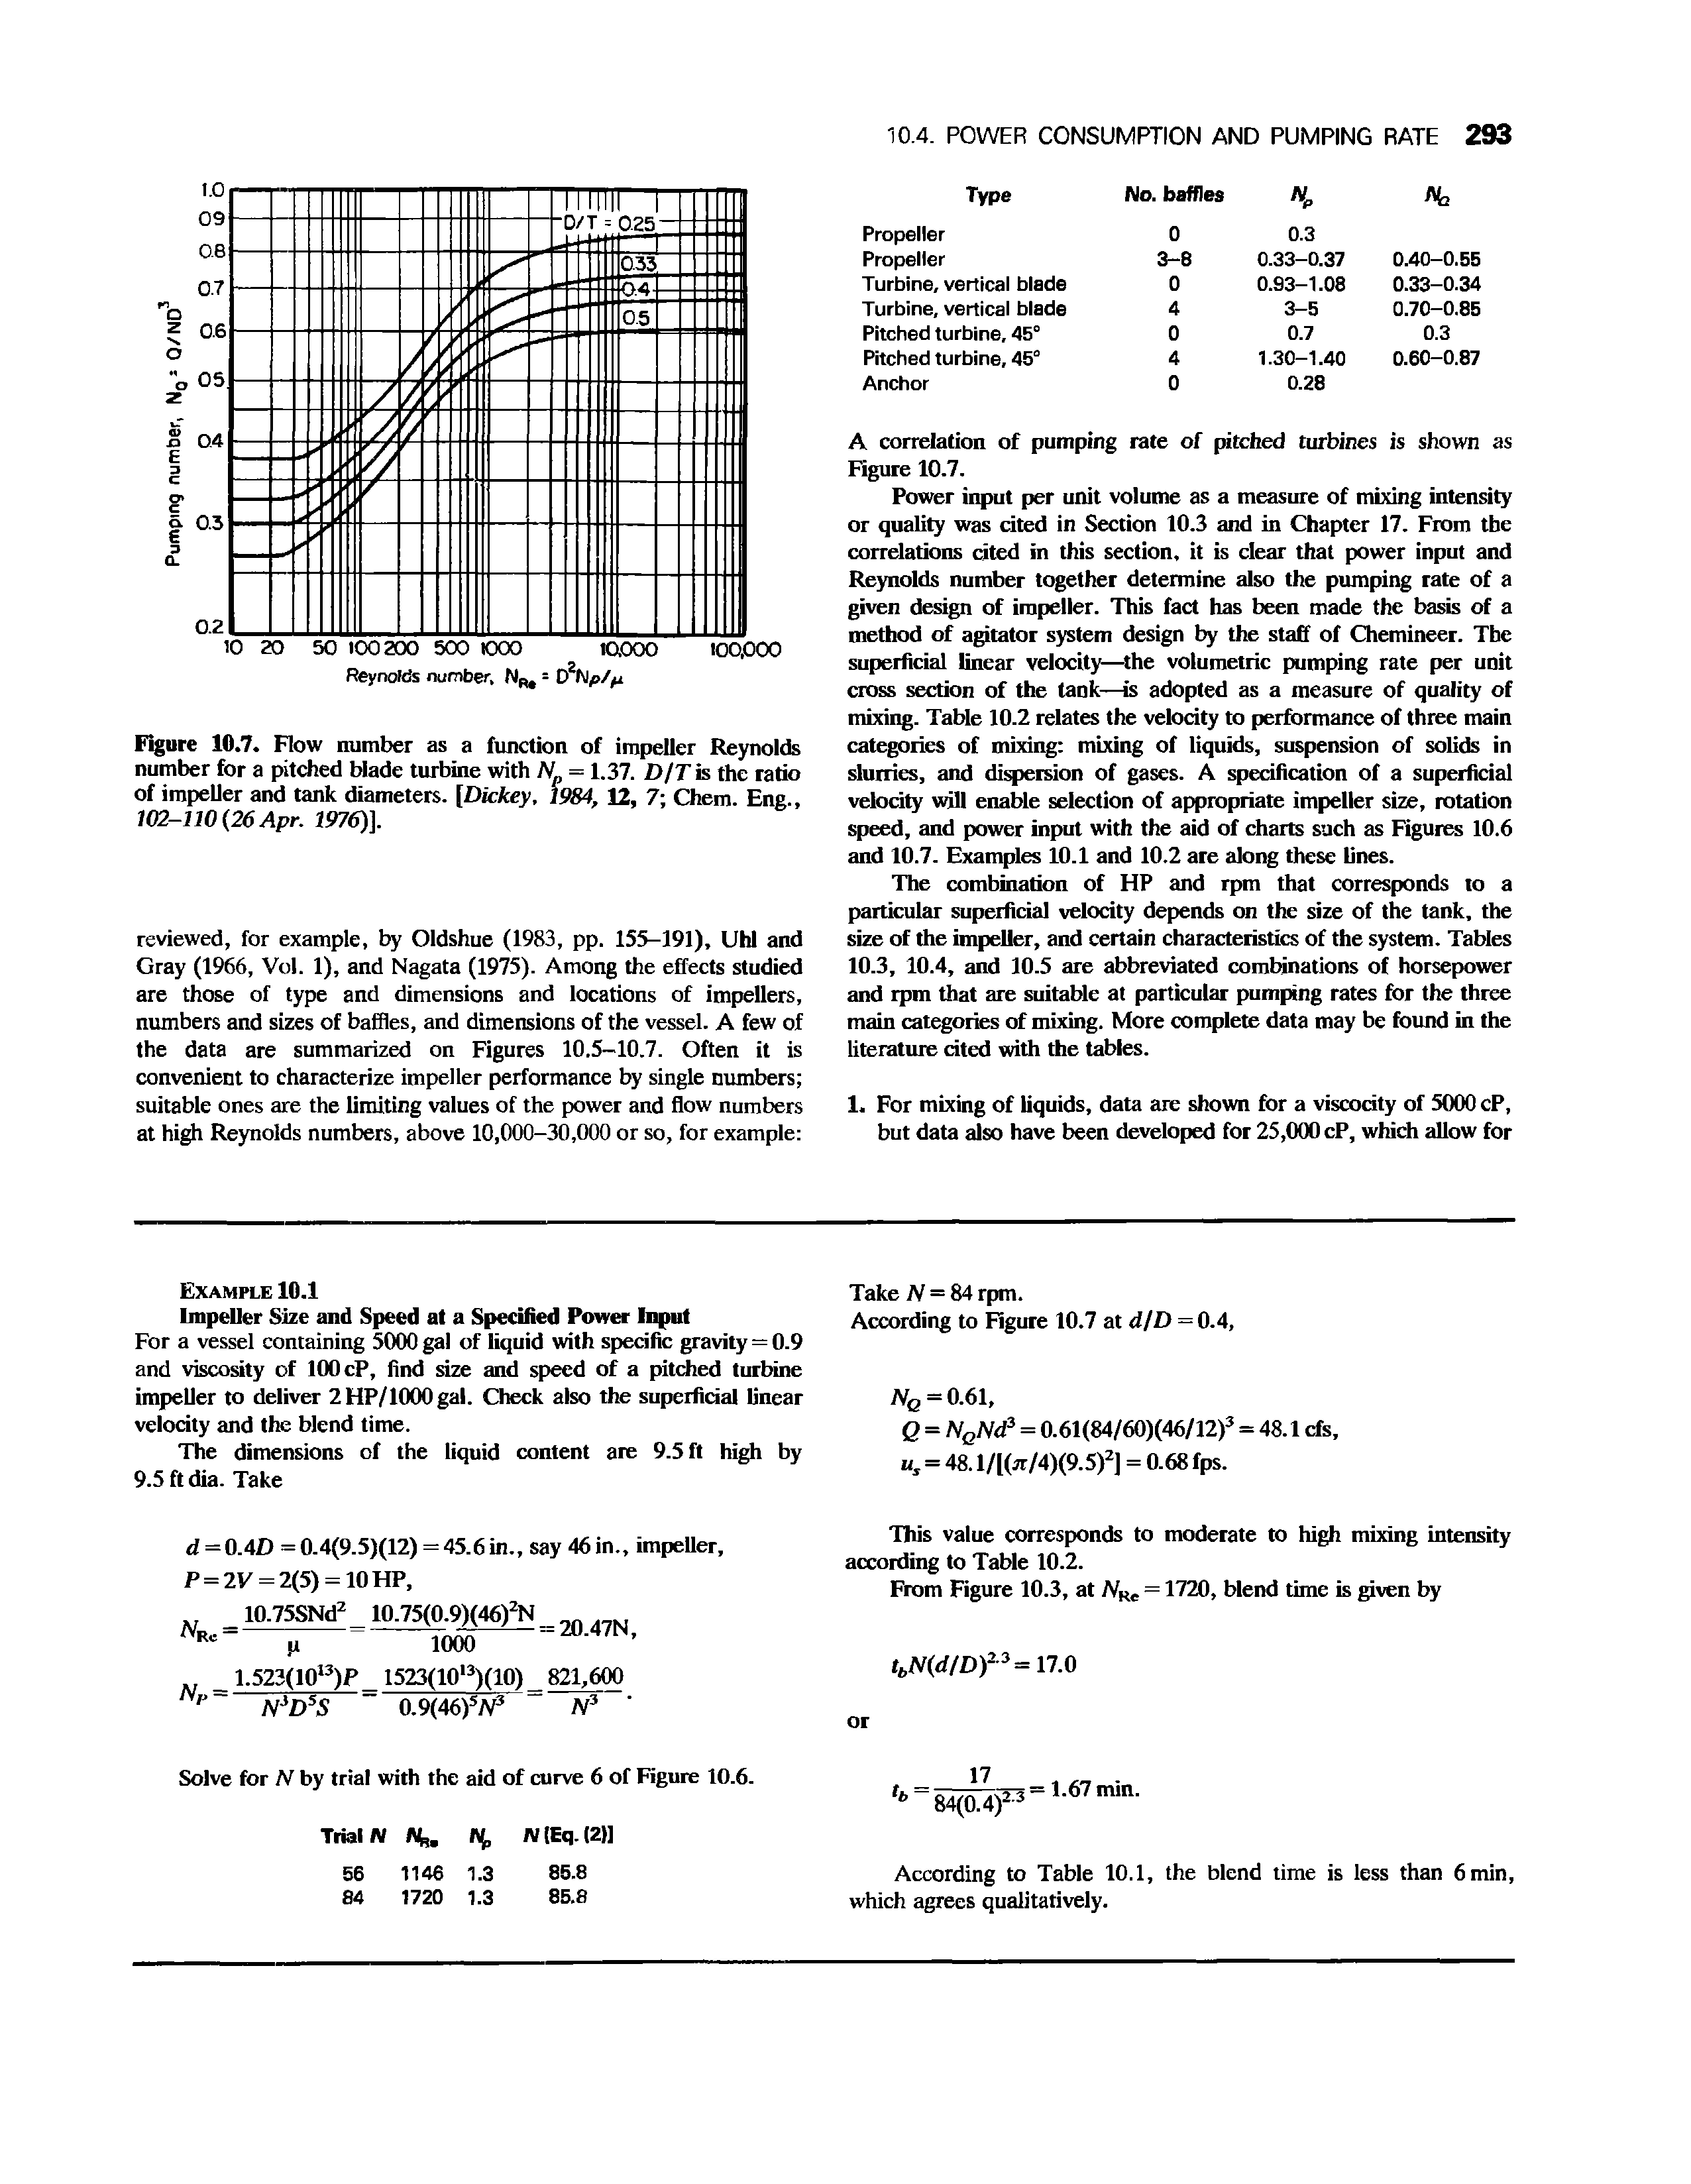 Figure 10.7. Flow number as a function of impeller Reynolds number for a pitched blade turbine with AE = 1.37. D/T is the ratio of impeller and tank diameters. [Dickey, 1984, 12, 7 Chem. Eng., 102-110 26 Apr. 1976)].